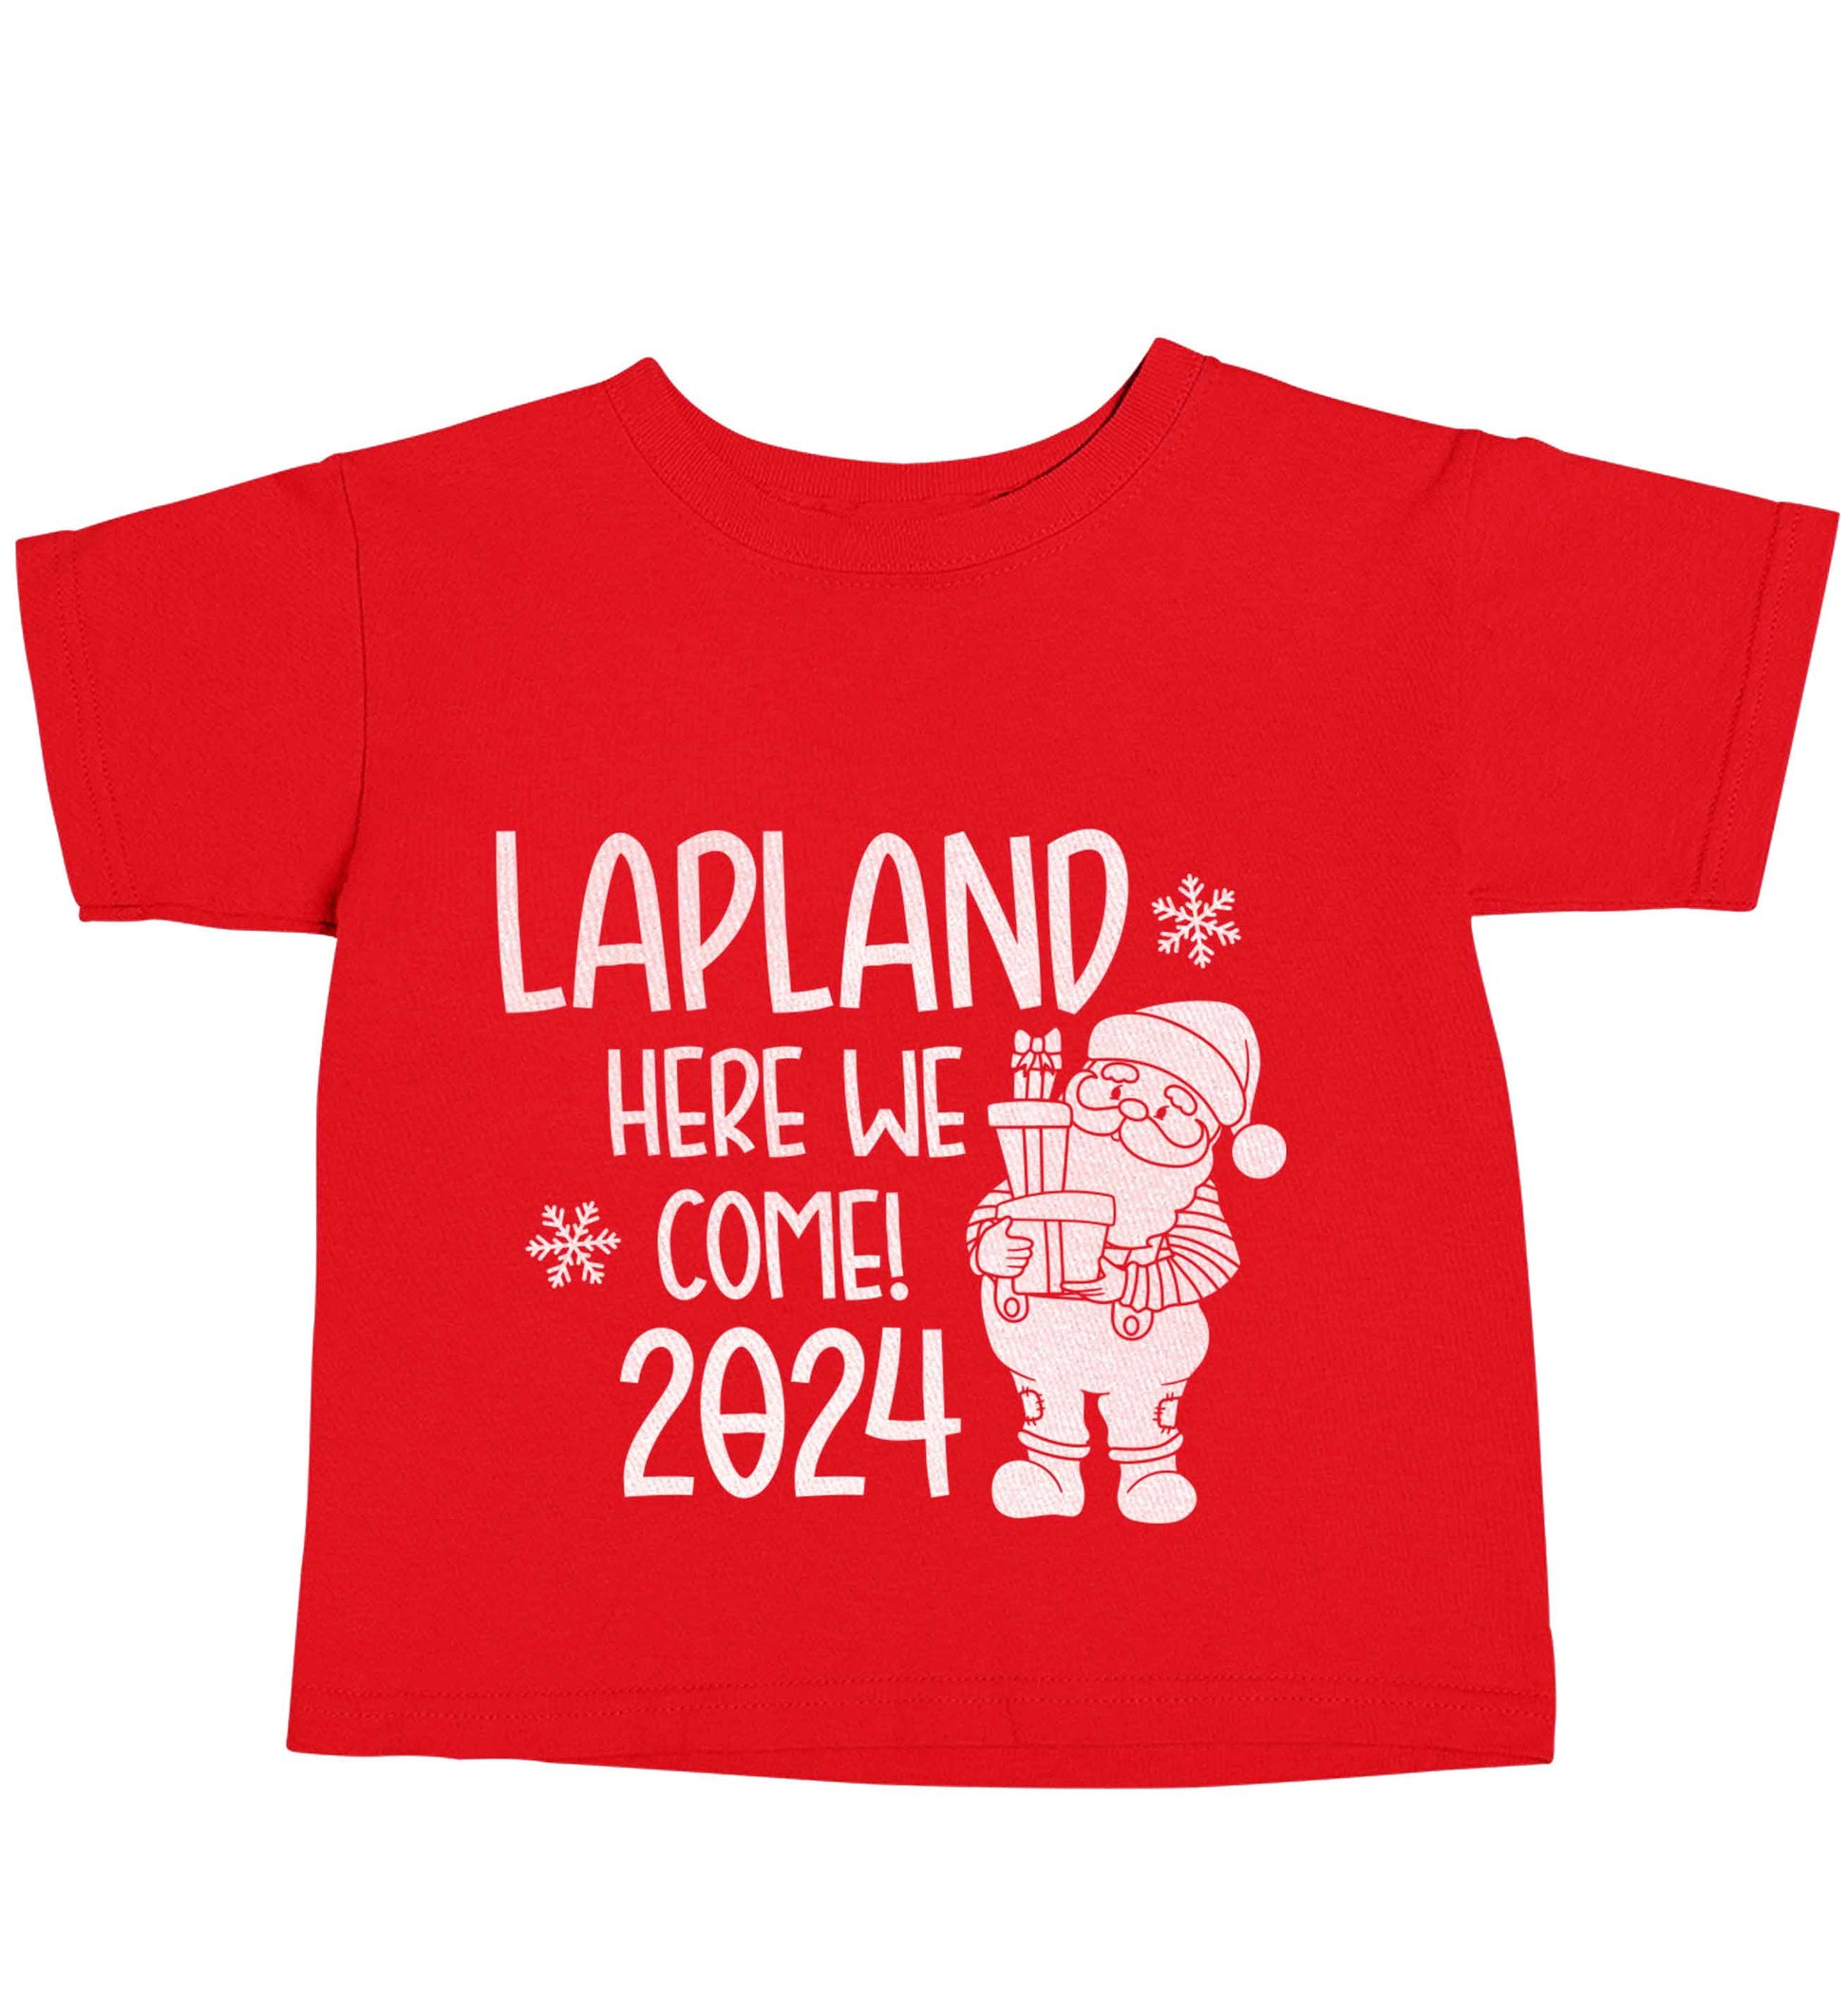 Lapland here we come red baby toddler Tshirt 2 Years